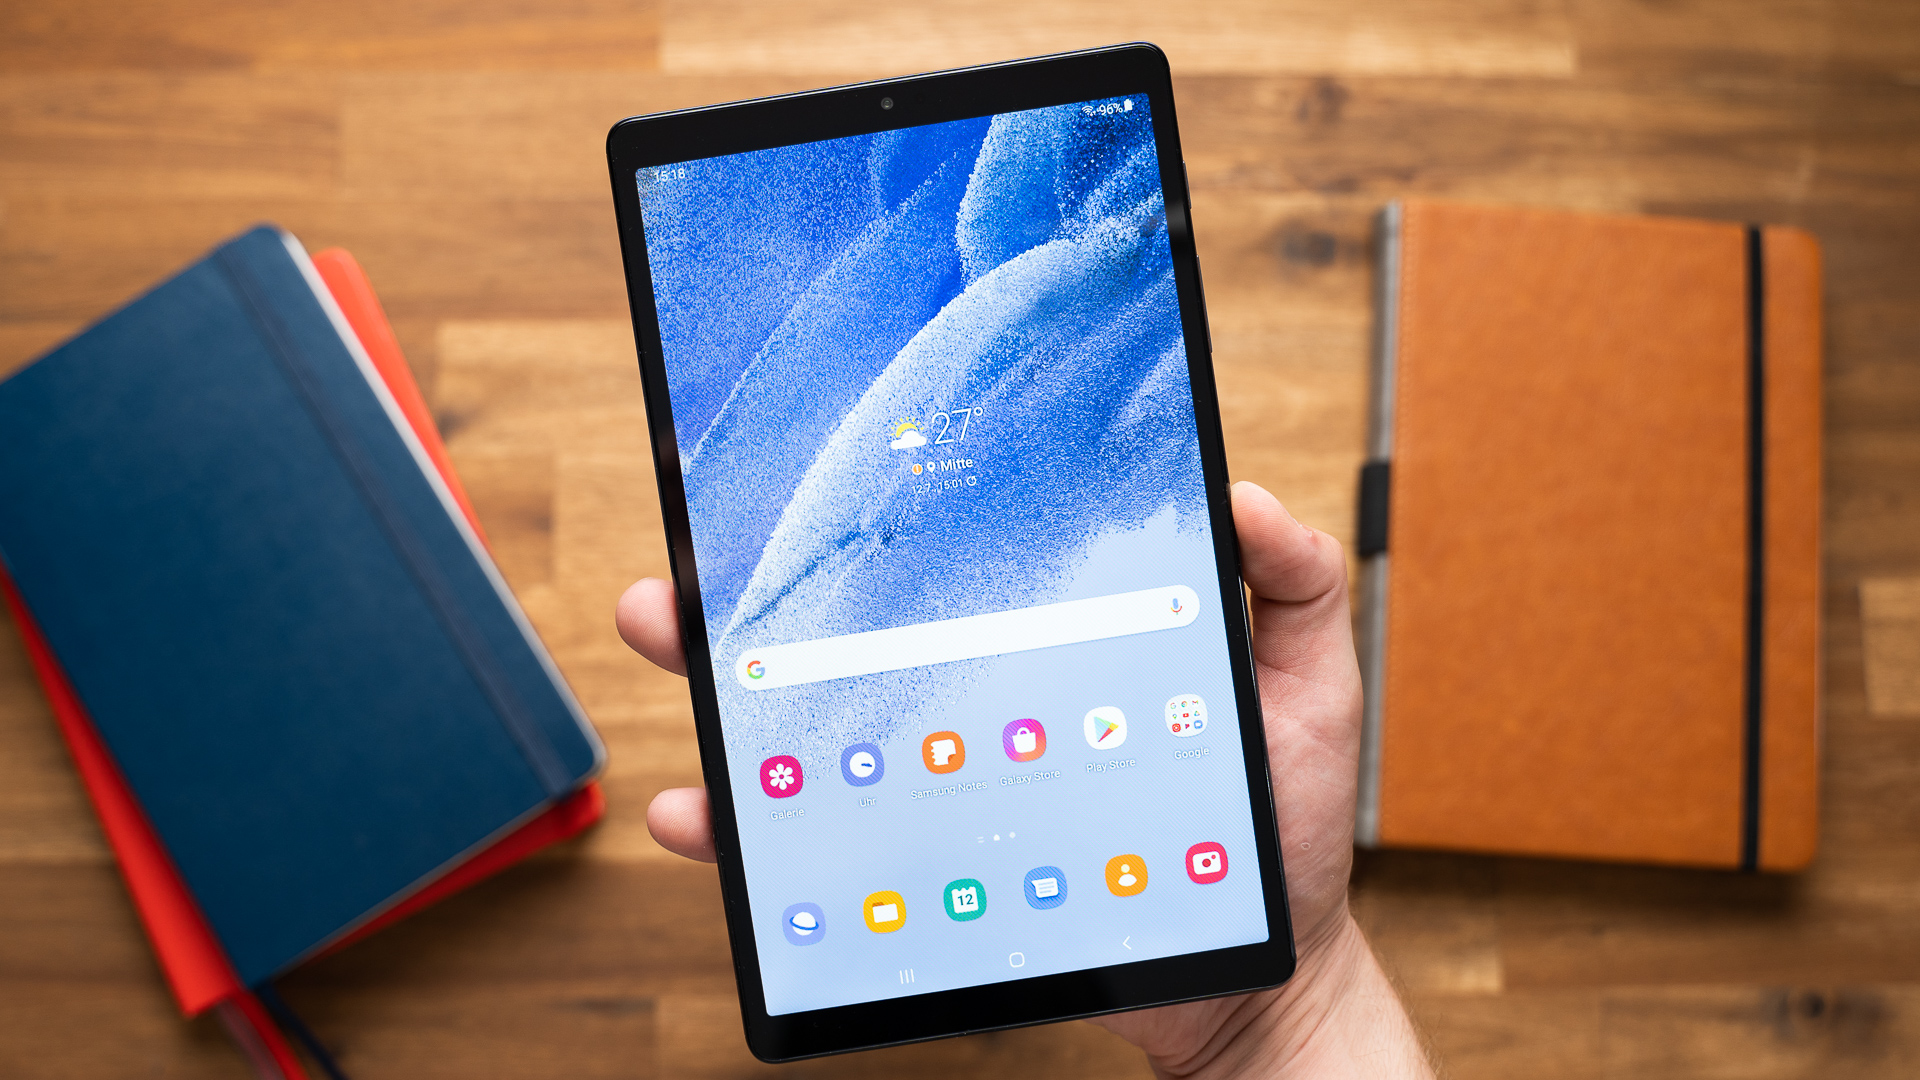 Samsung Galaxy Tab A7 Lite Review: An Affordable 8-Inch Tablet